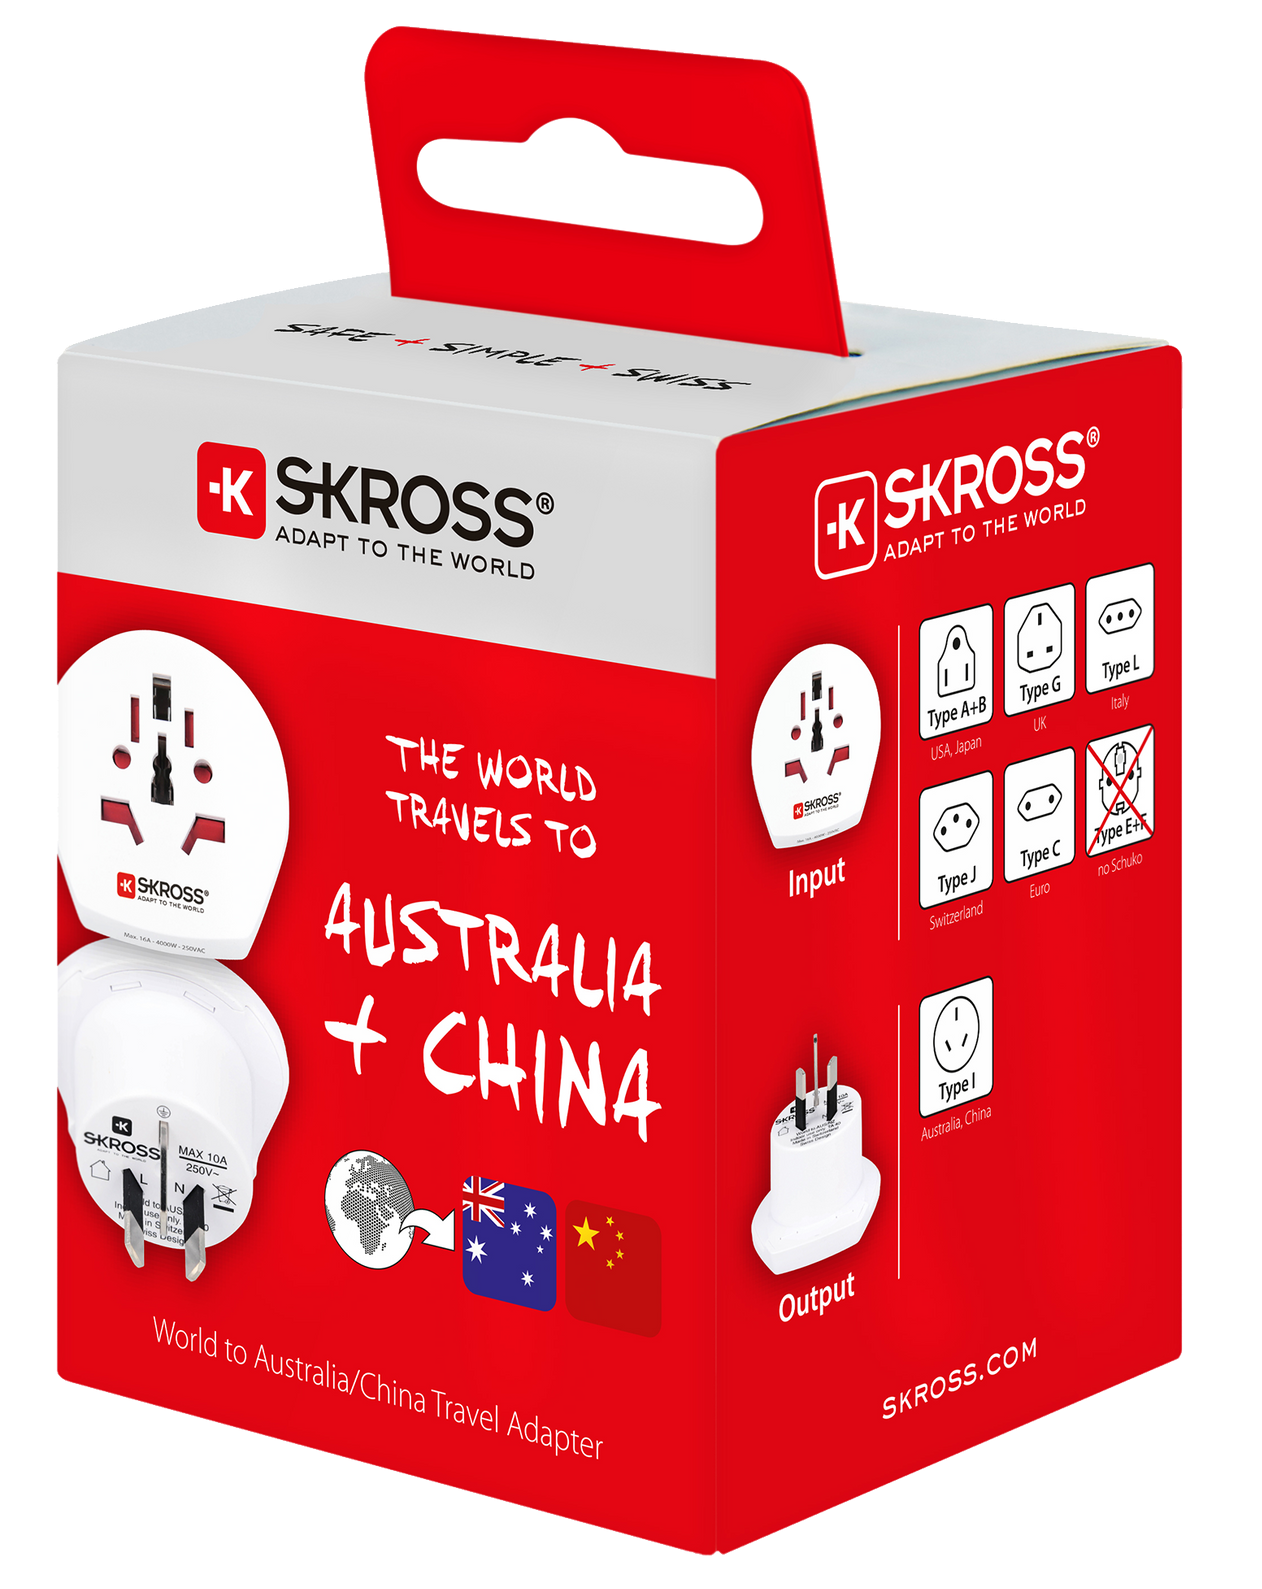 Skross 3-Pole World to Australia/China Travel Adapter Packaging